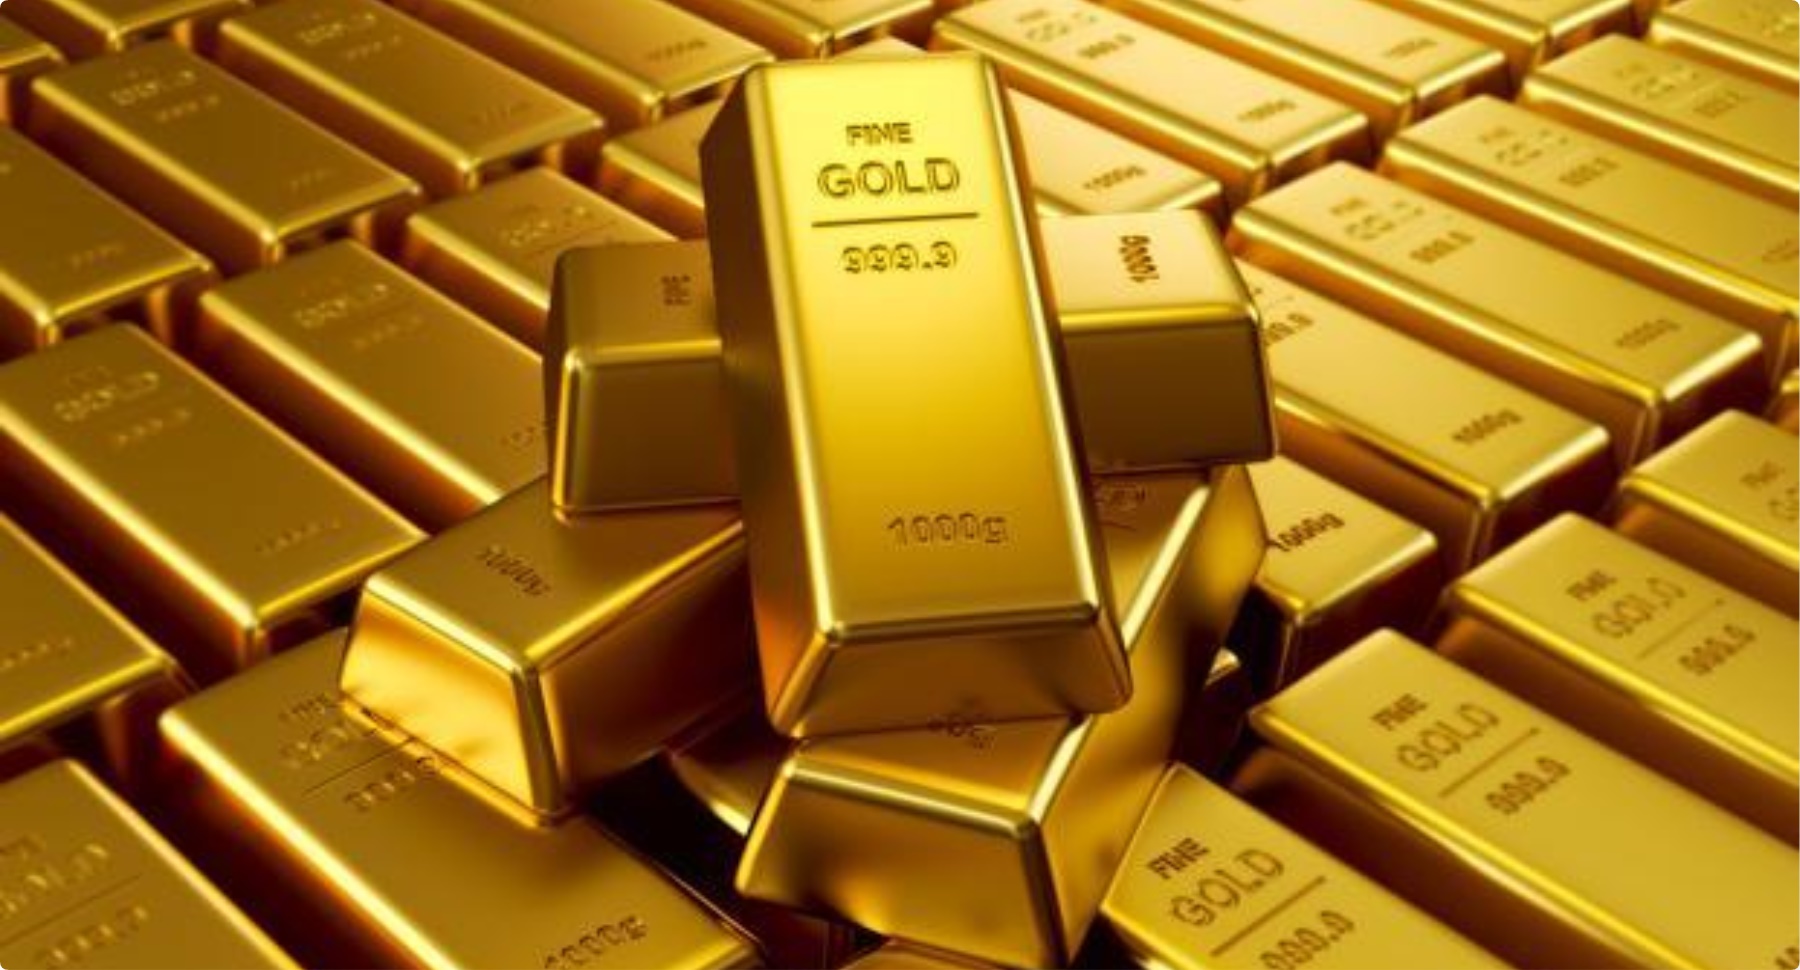 Databank denies dealing in gold amid Menzgold fallouts